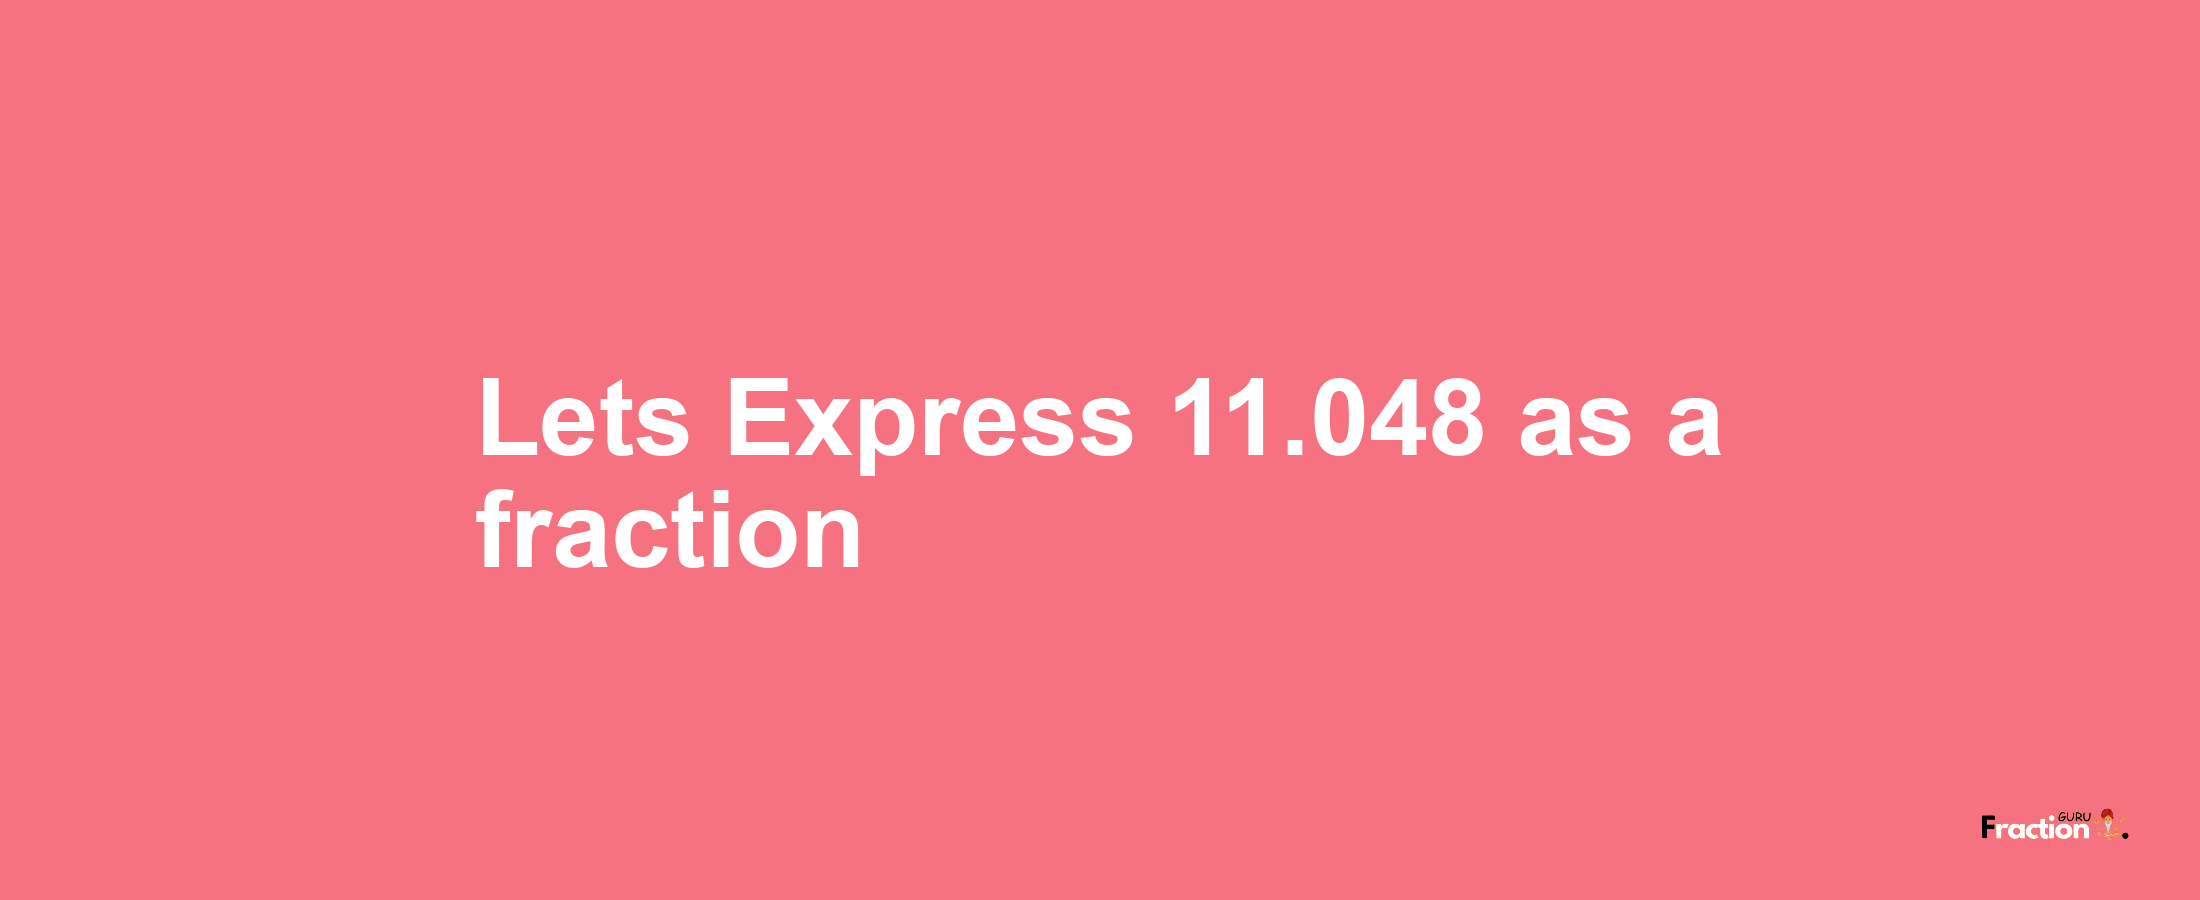 Lets Express 11.048 as afraction